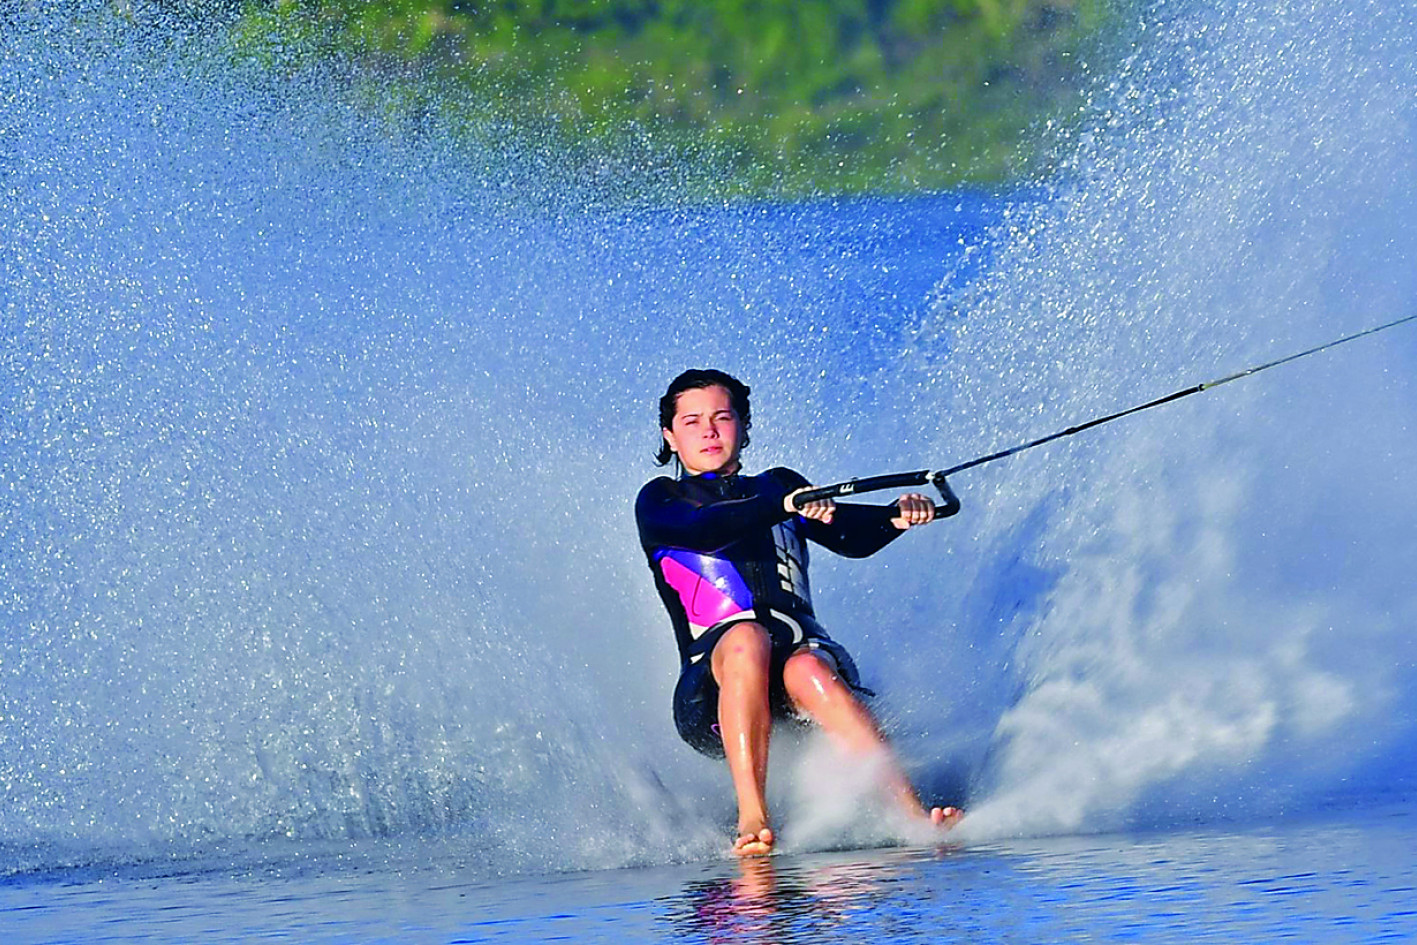 Local barefoot waterskiing star Lindsie Jack is currently skiing in the Australian Barefoot Championships with aims for a podium finish.